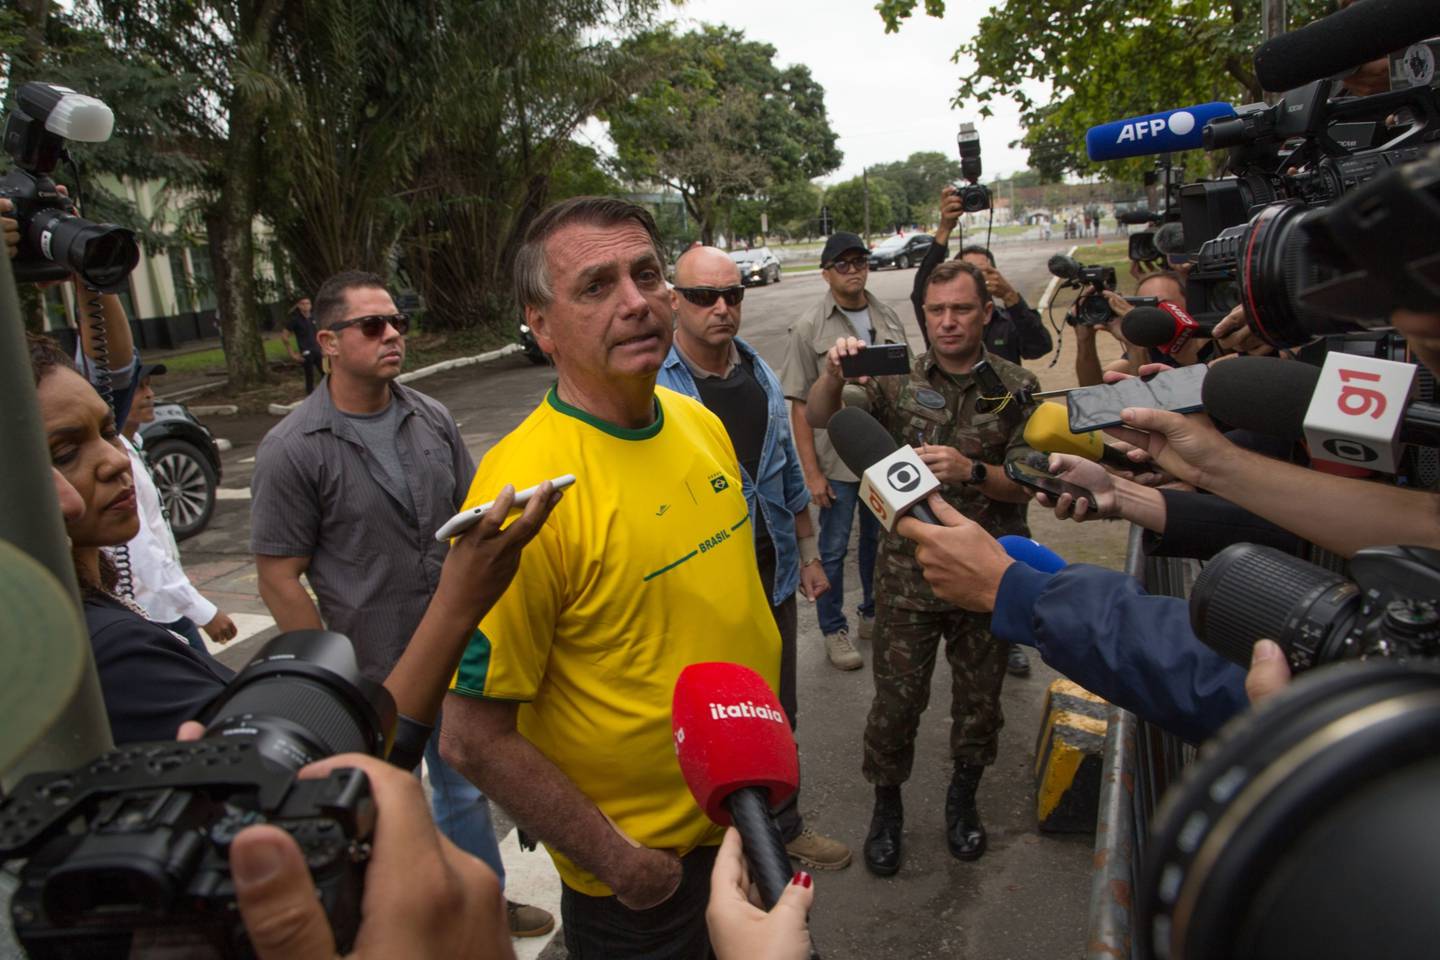 Jair Bolsonaro speaks to members of the media after casting a ballot at a polling station during the presidential elections in Rio de Janeiro, Brazil, on Oct. 2.dfd